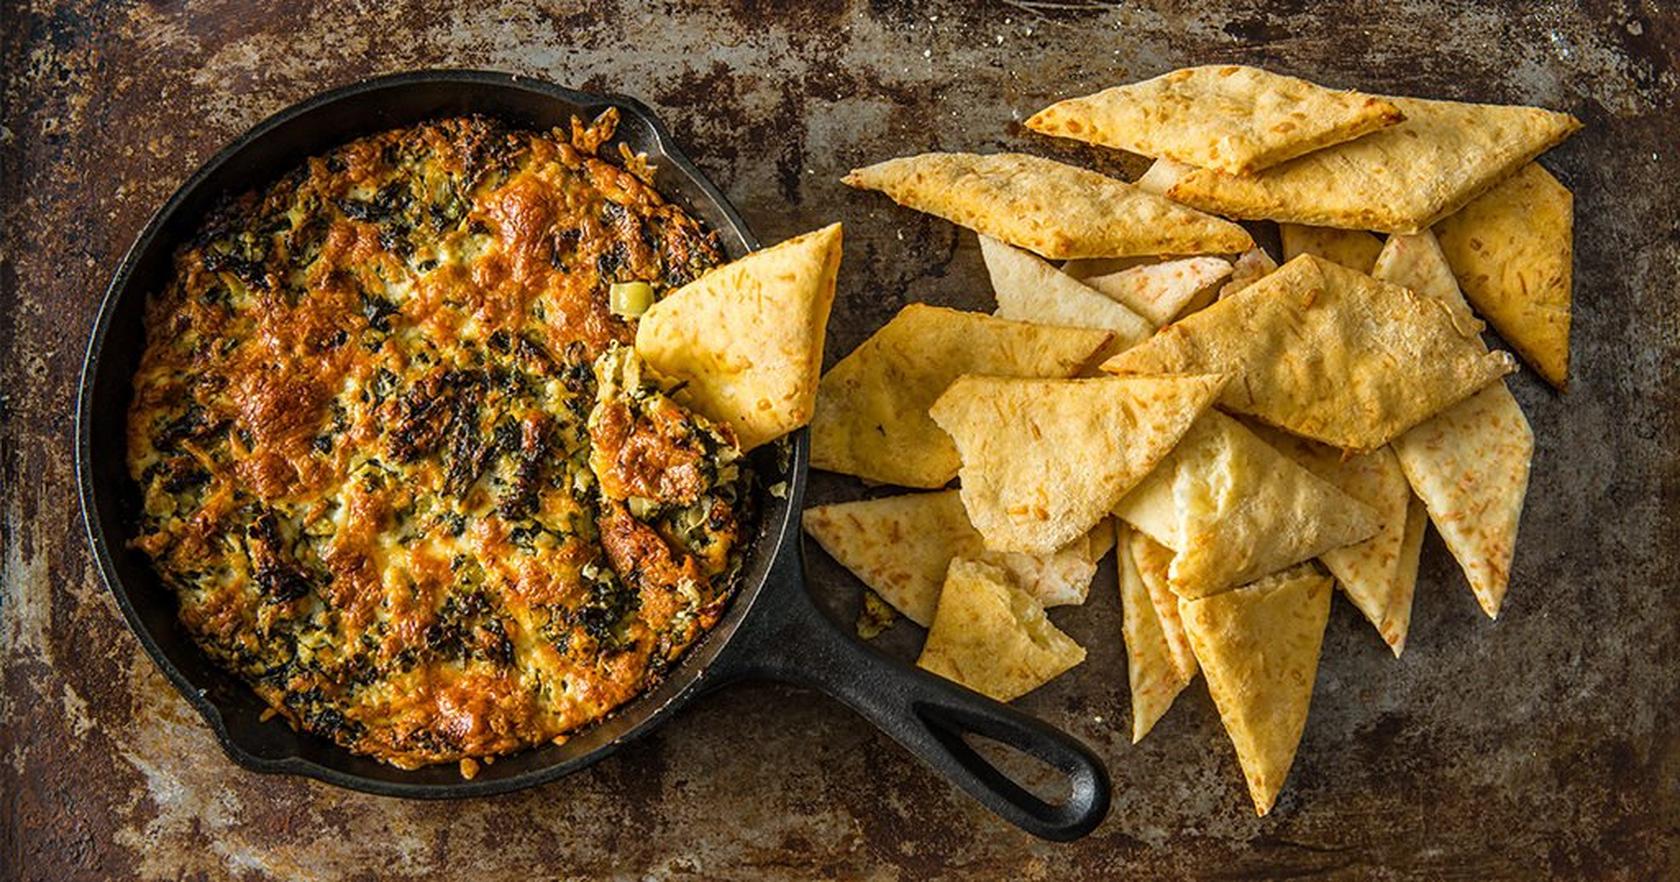 Baked Artichoke Dip with Homemade Flatbread